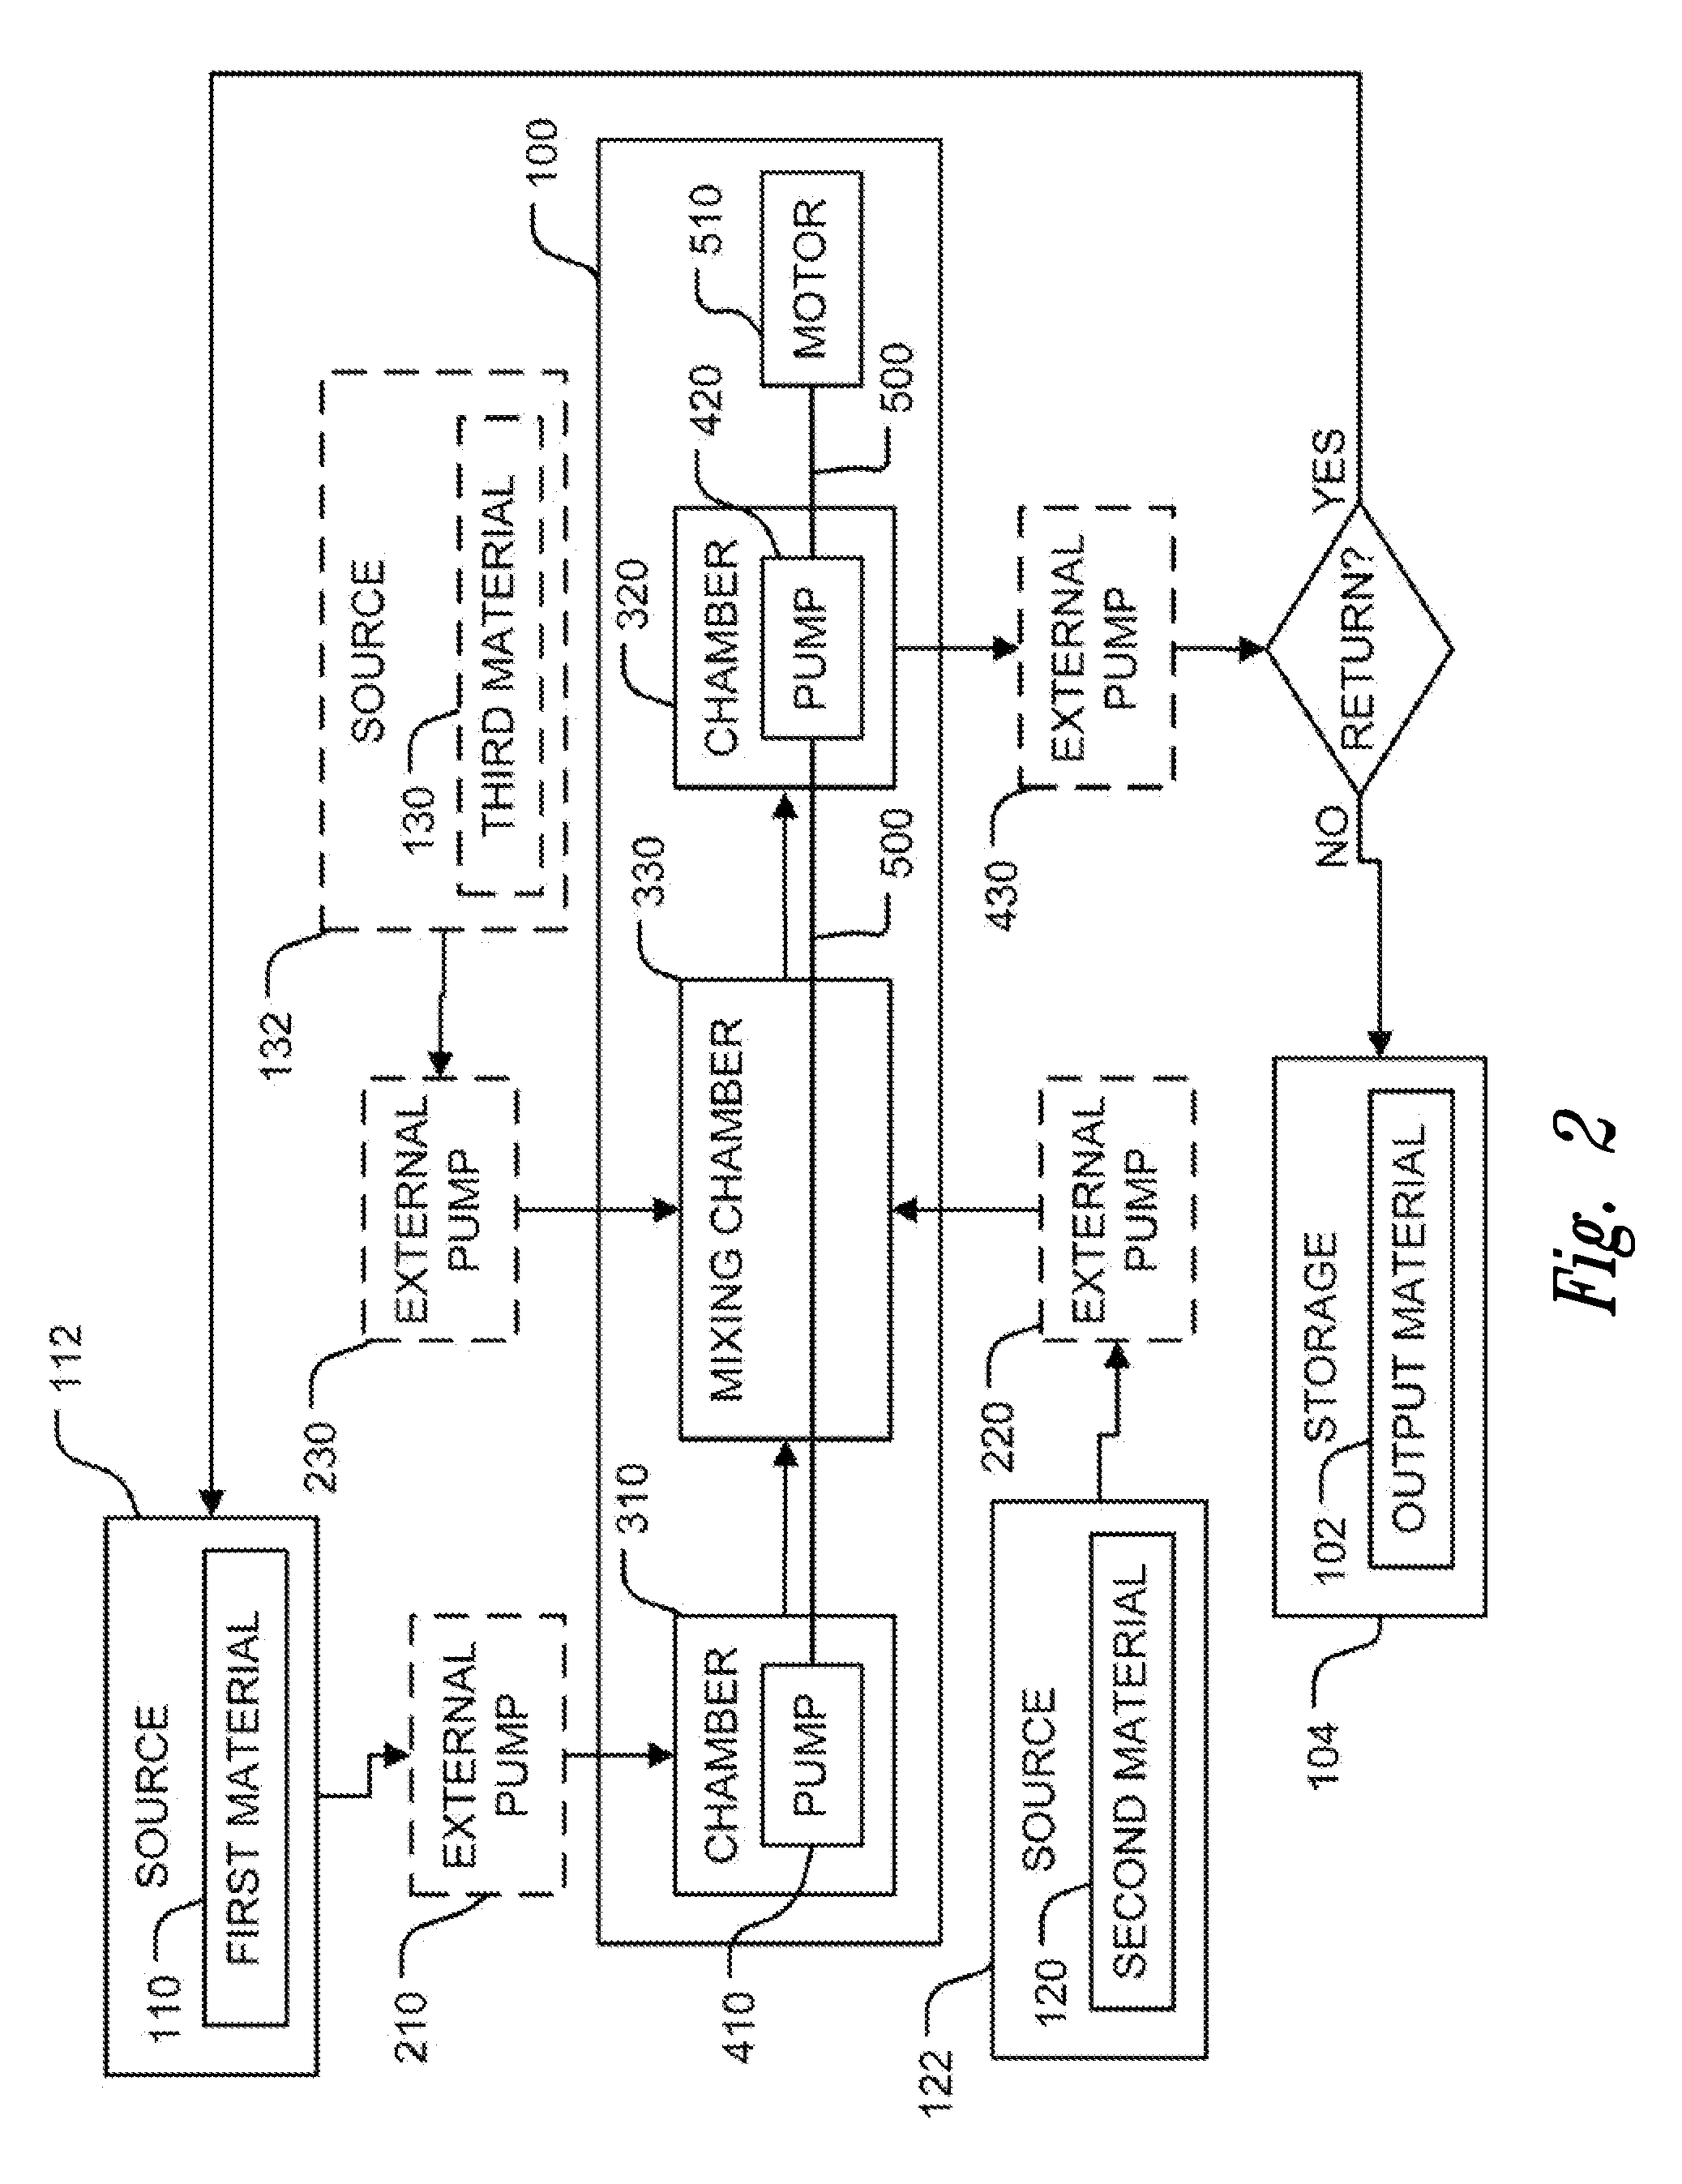 Bacteriostatic or bacteriocidal compositions and methods